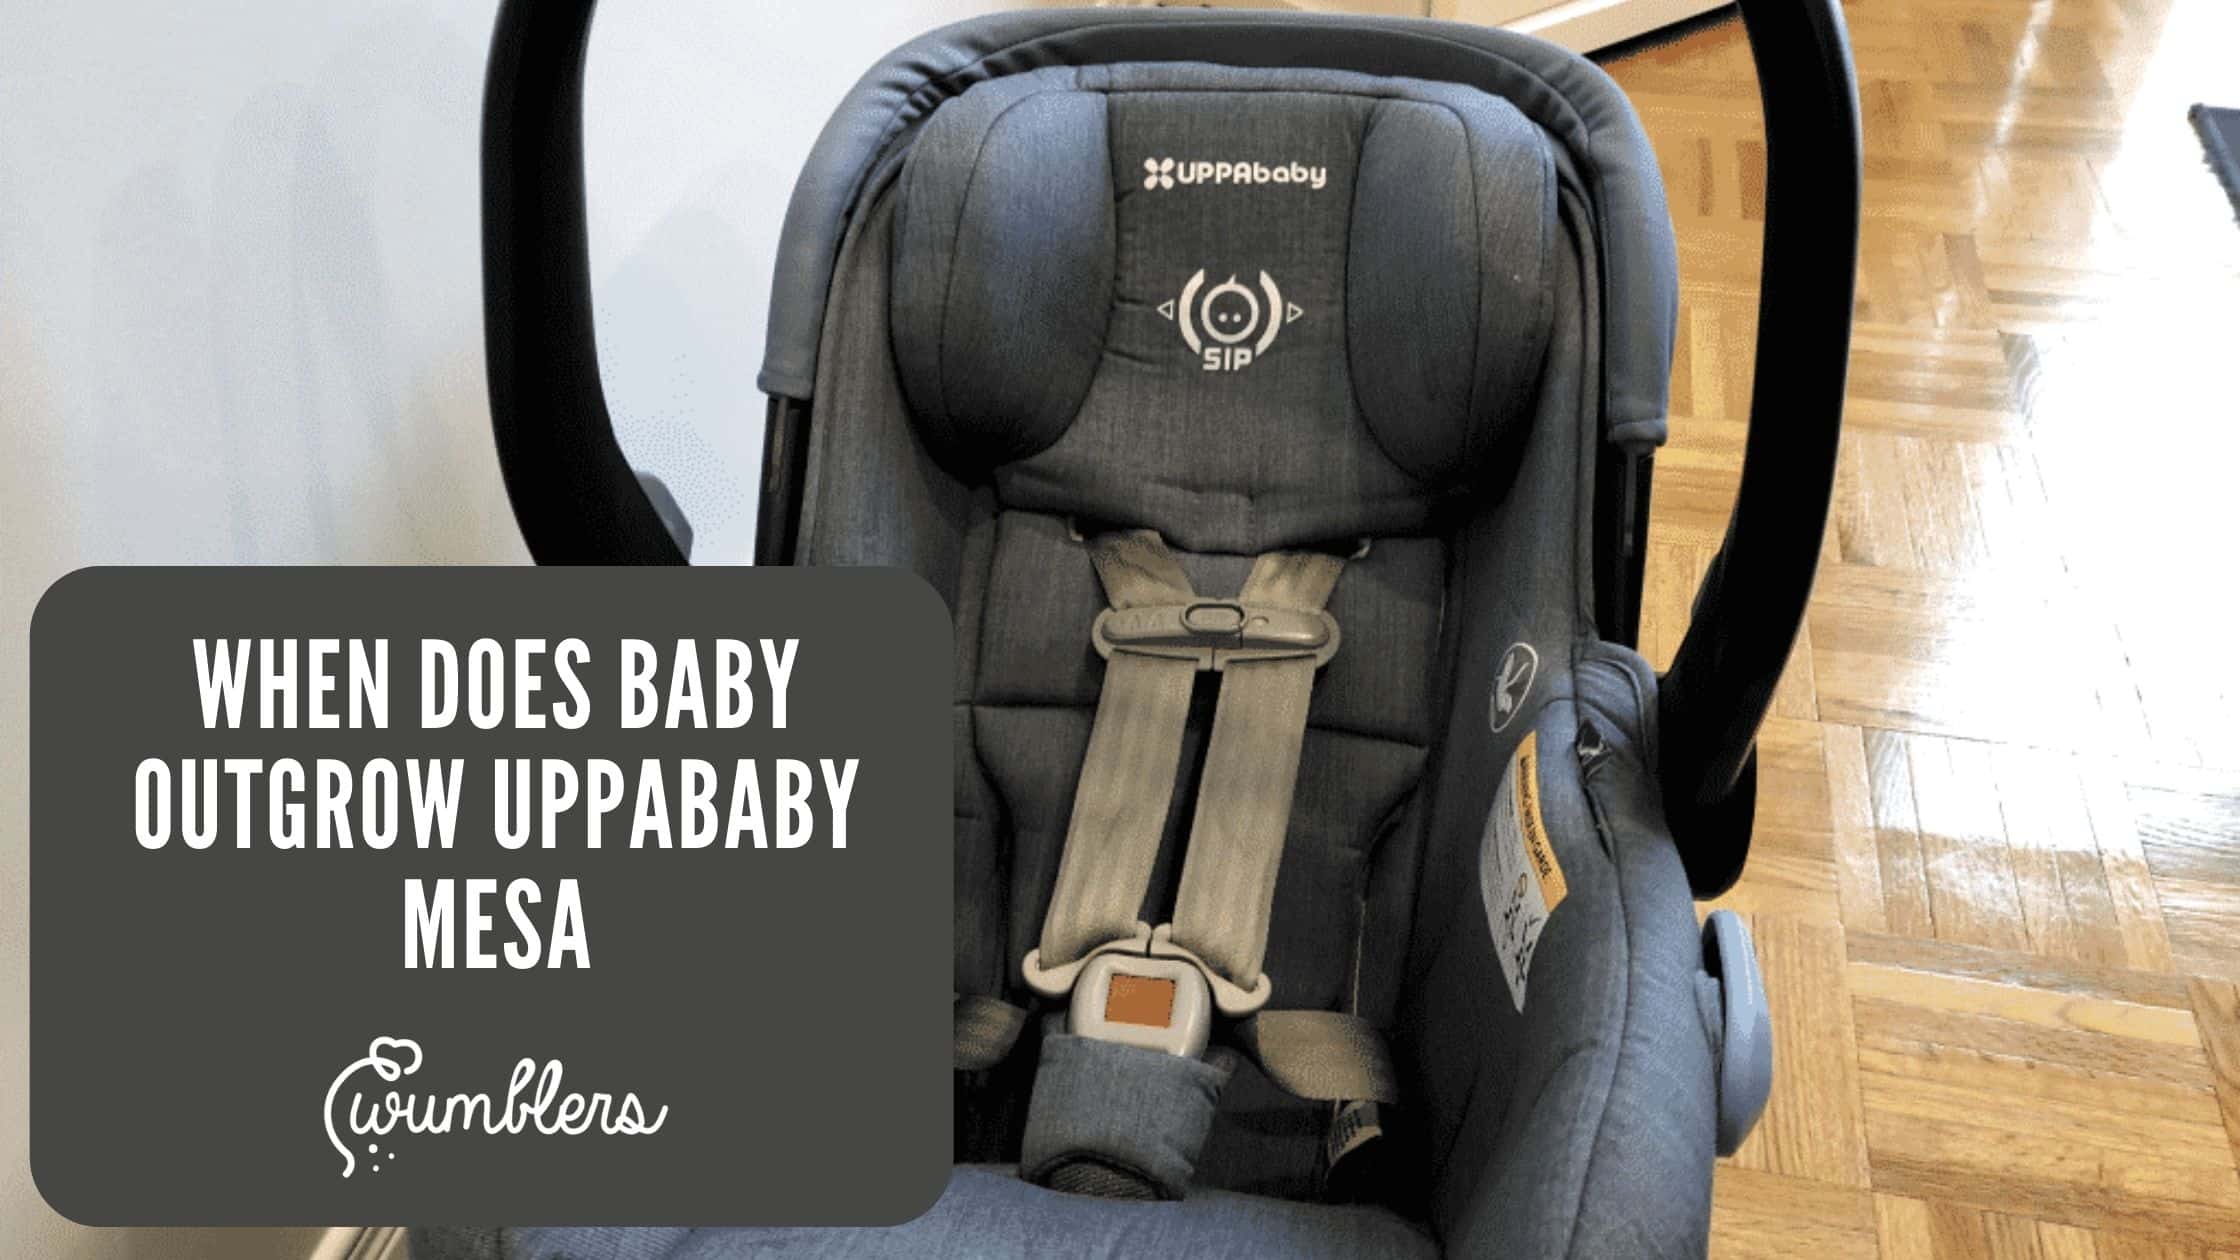 When Does Baby Outgrow Uppababy Mesa